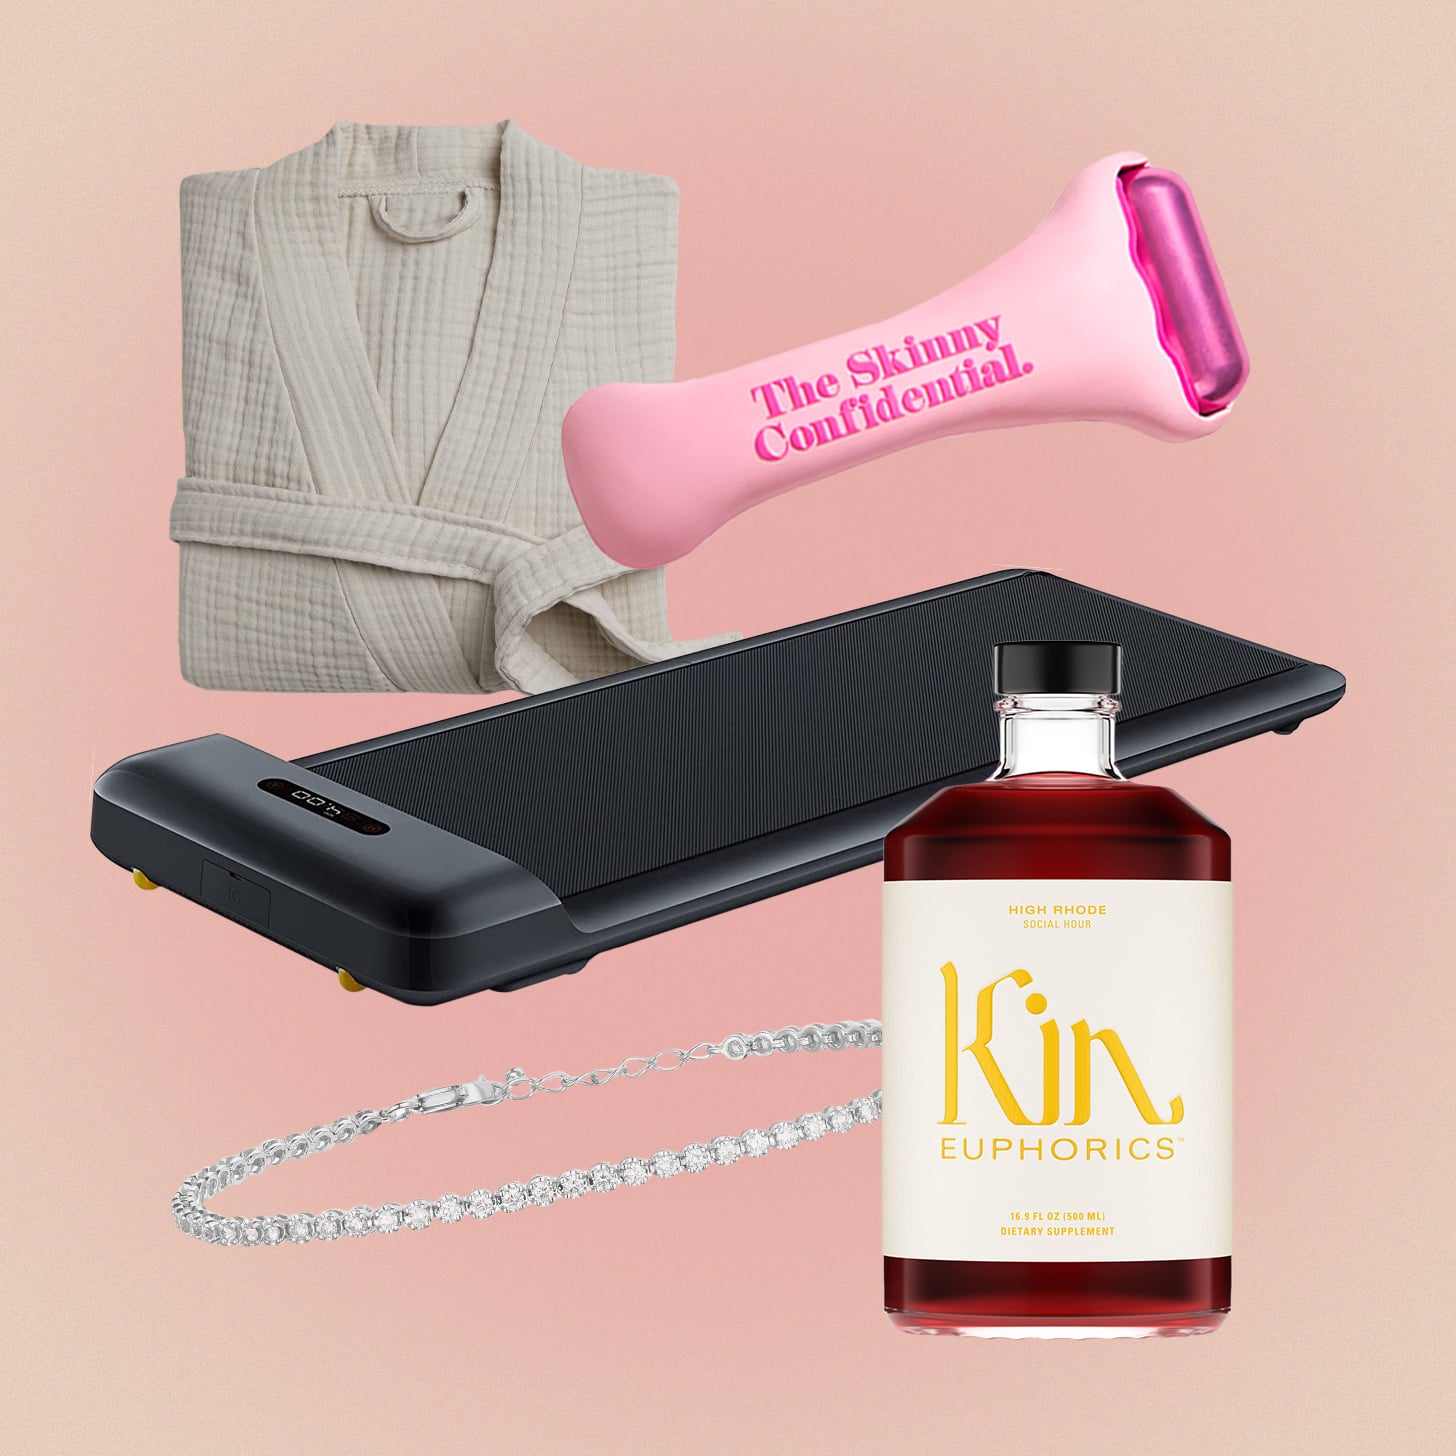 20 Thoughtful Relaxation Gifts for Women Who Deserve a Break